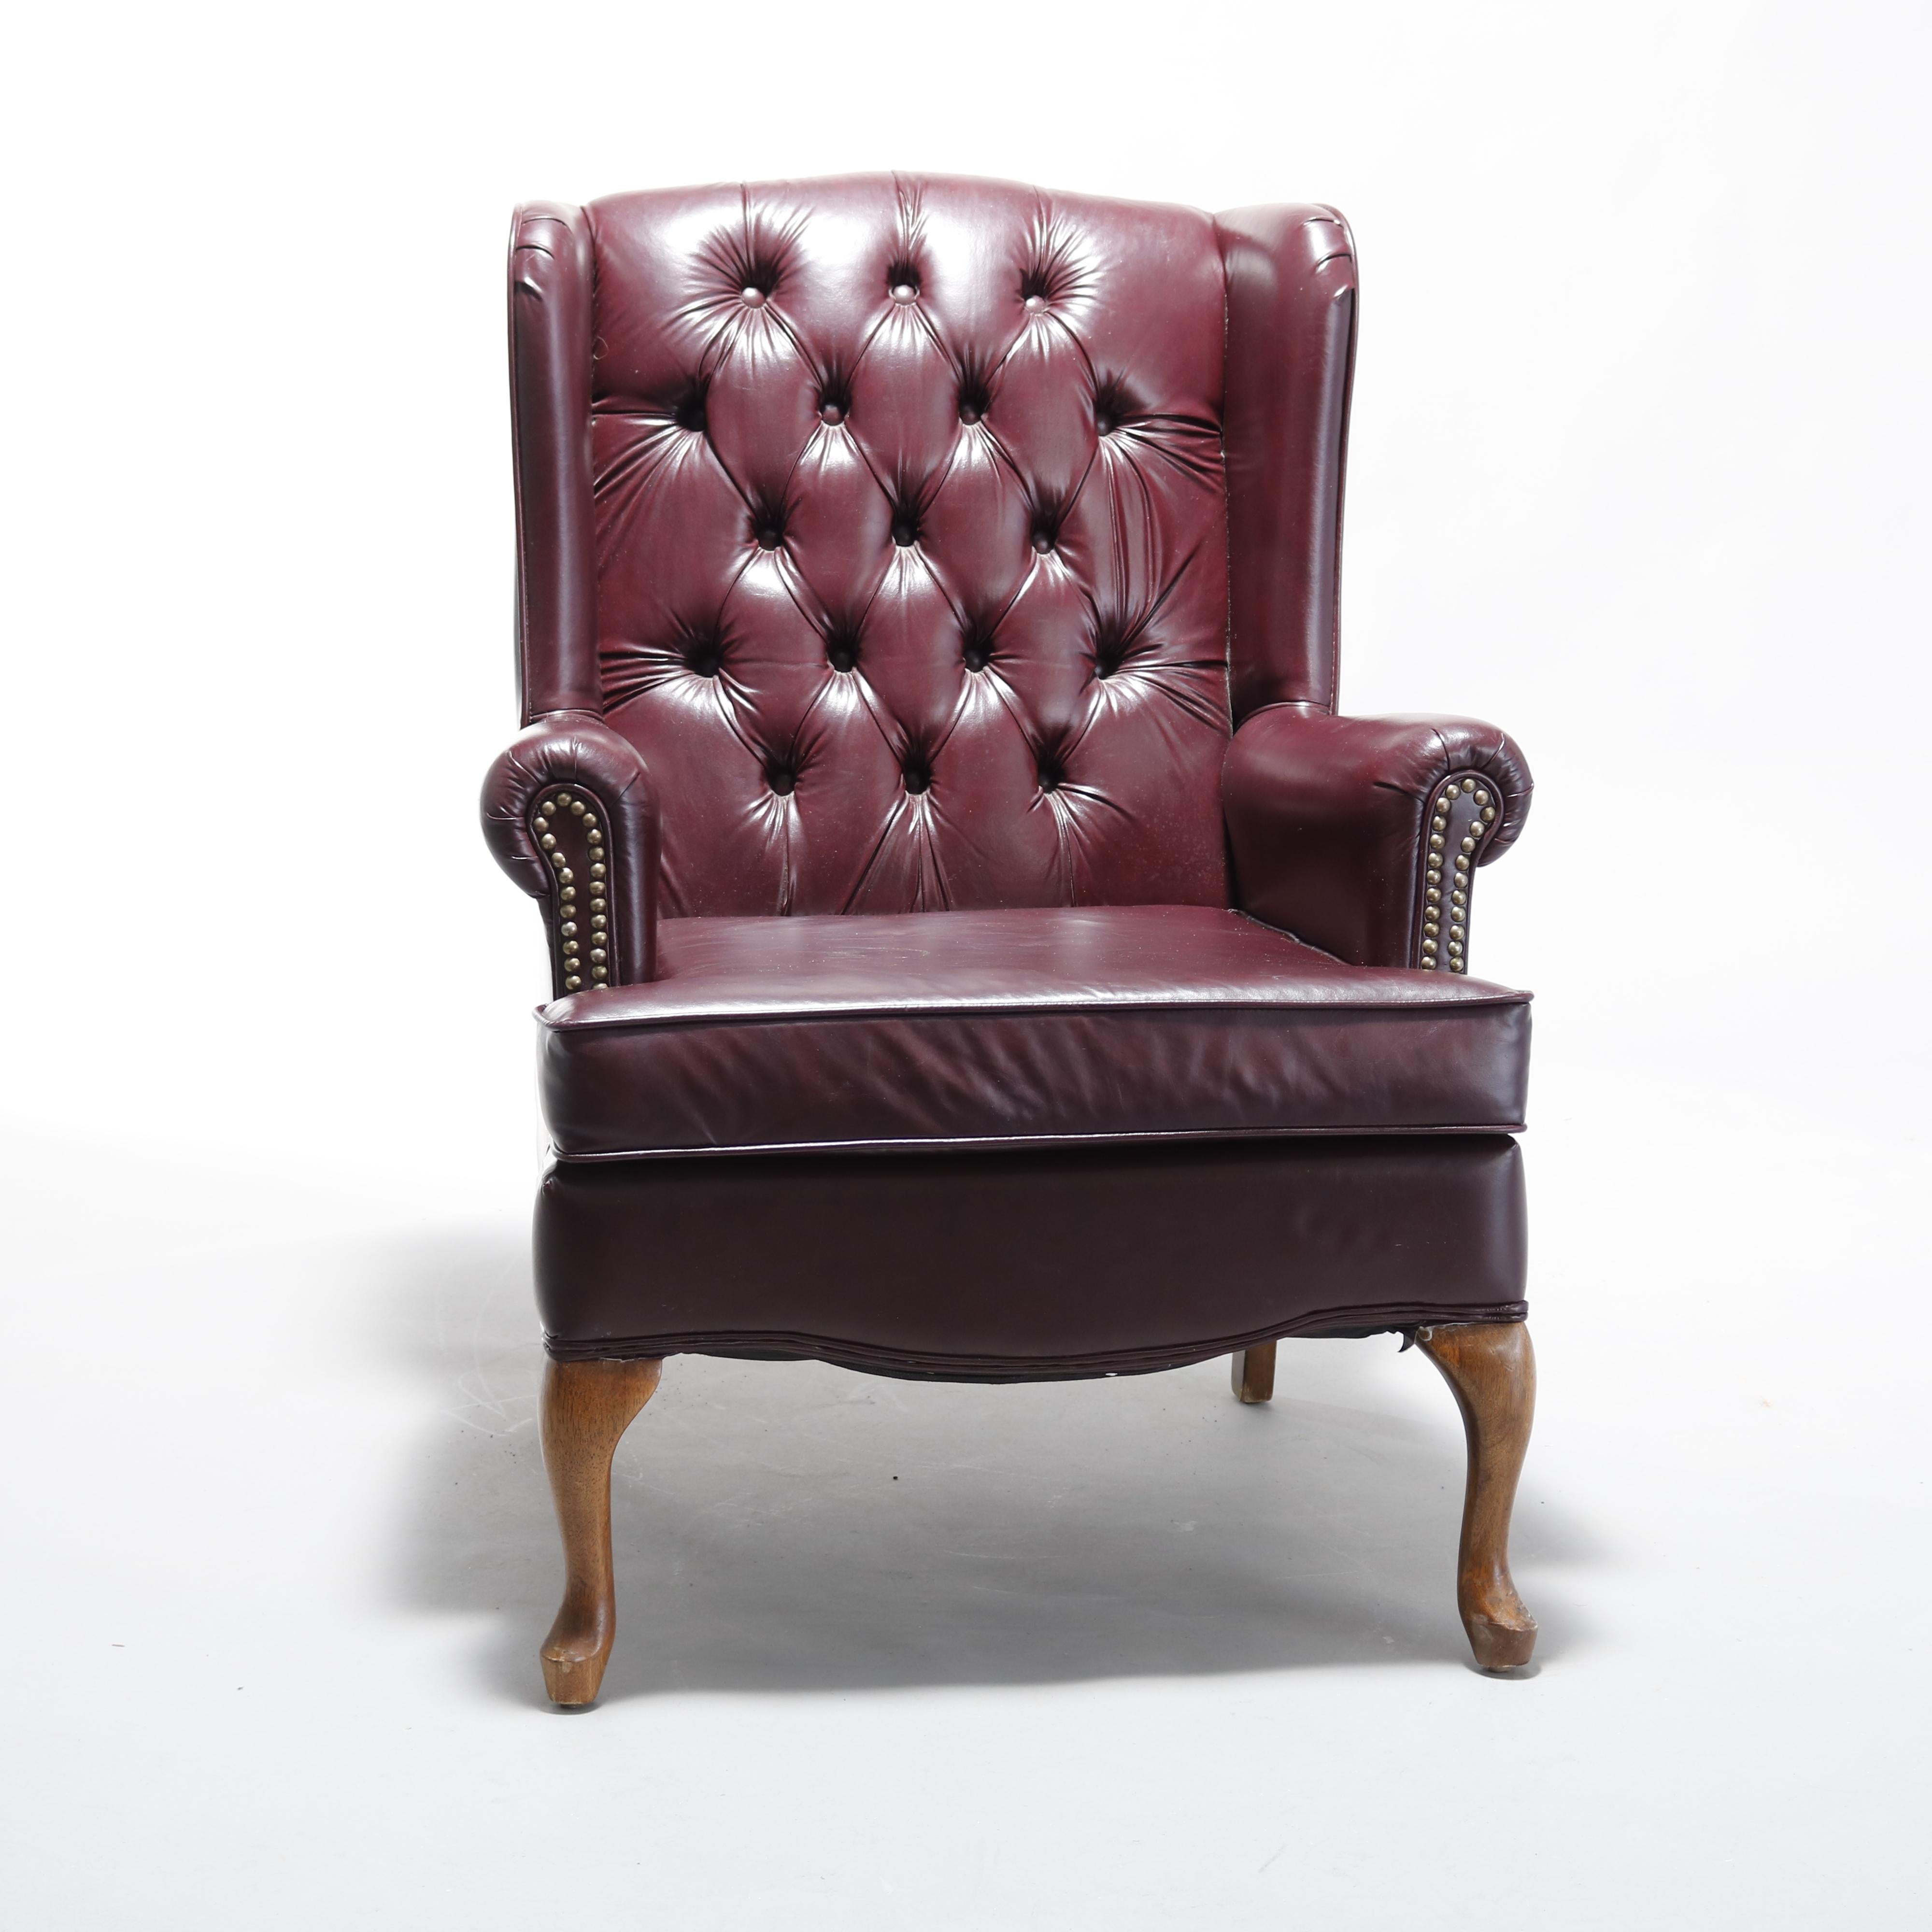 An antique Chesterfield wing back chair offers tufted leather with scroll forma arms and raised on carved cabriole legs, 20th century.

Measures: 39.5